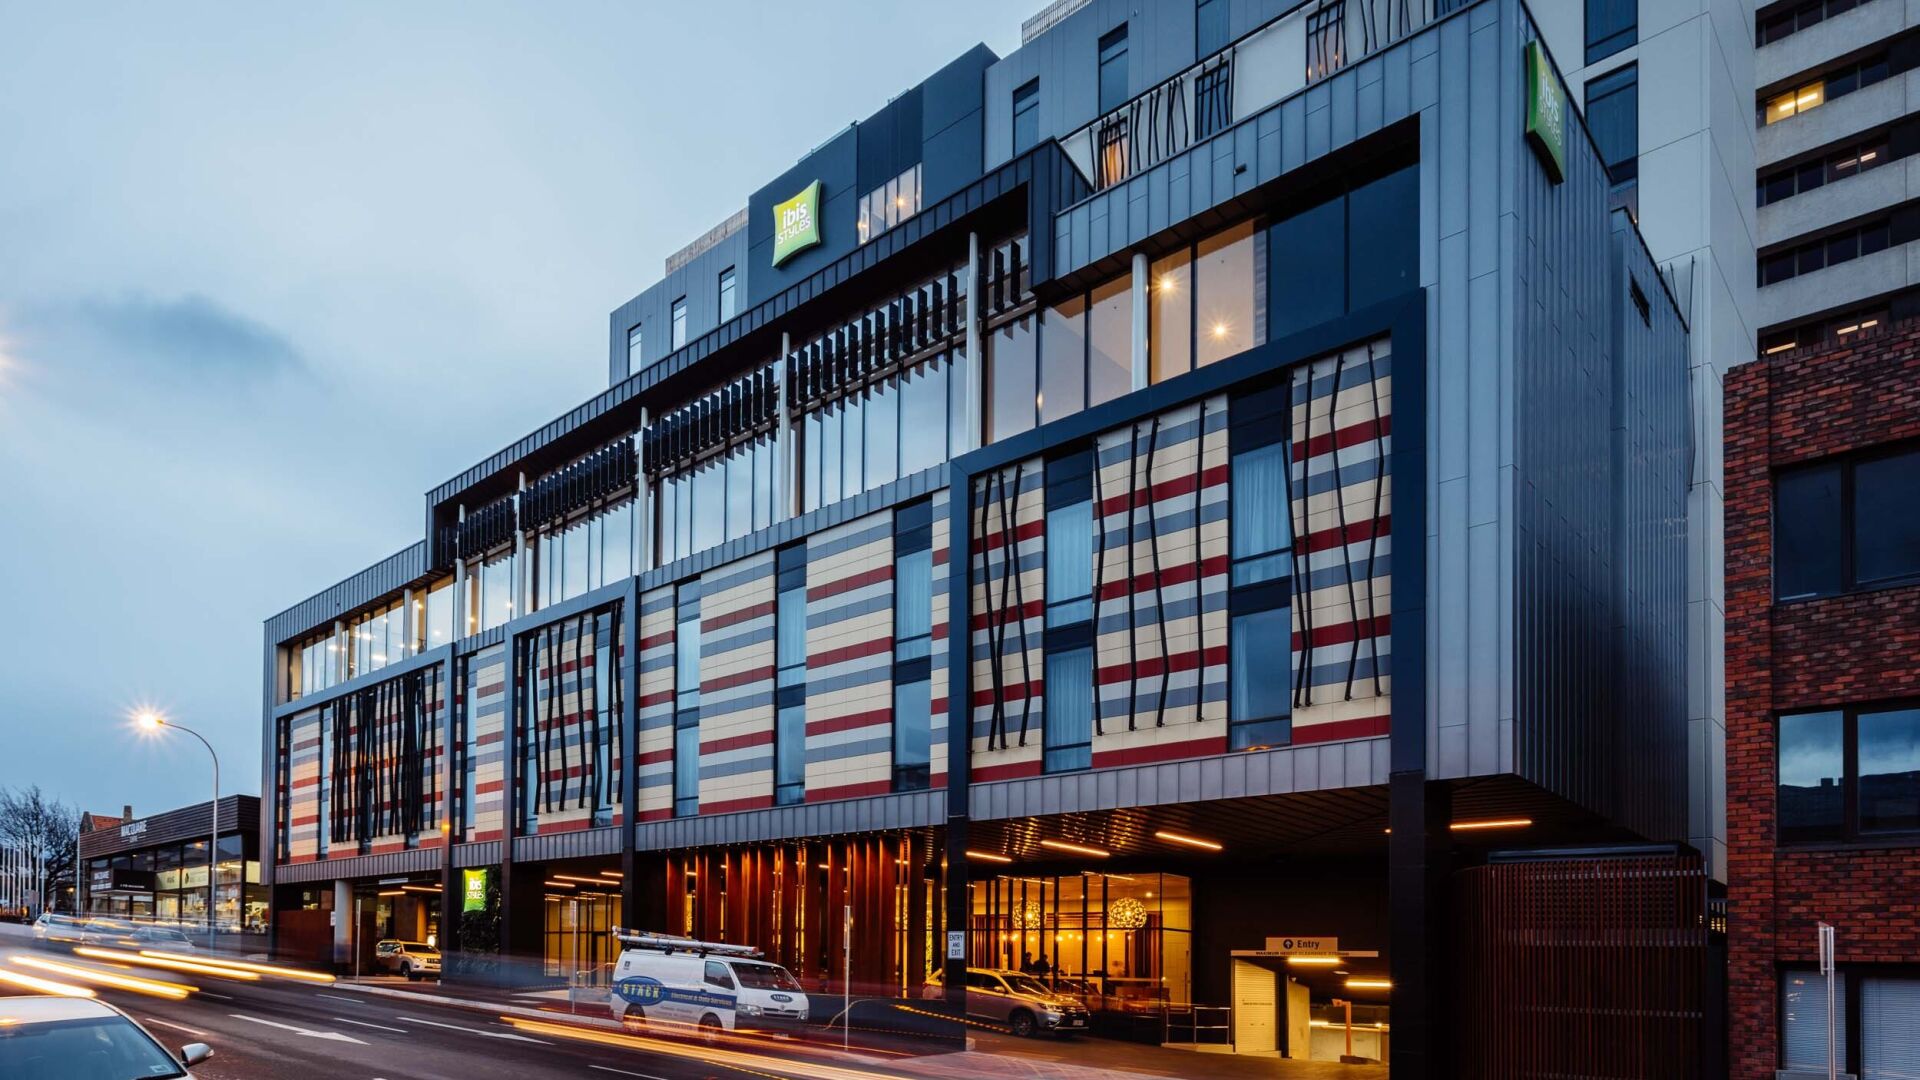 ibis Styles Hobart Hotel named Australia’s first and only 5-Star Green Star certified hotel